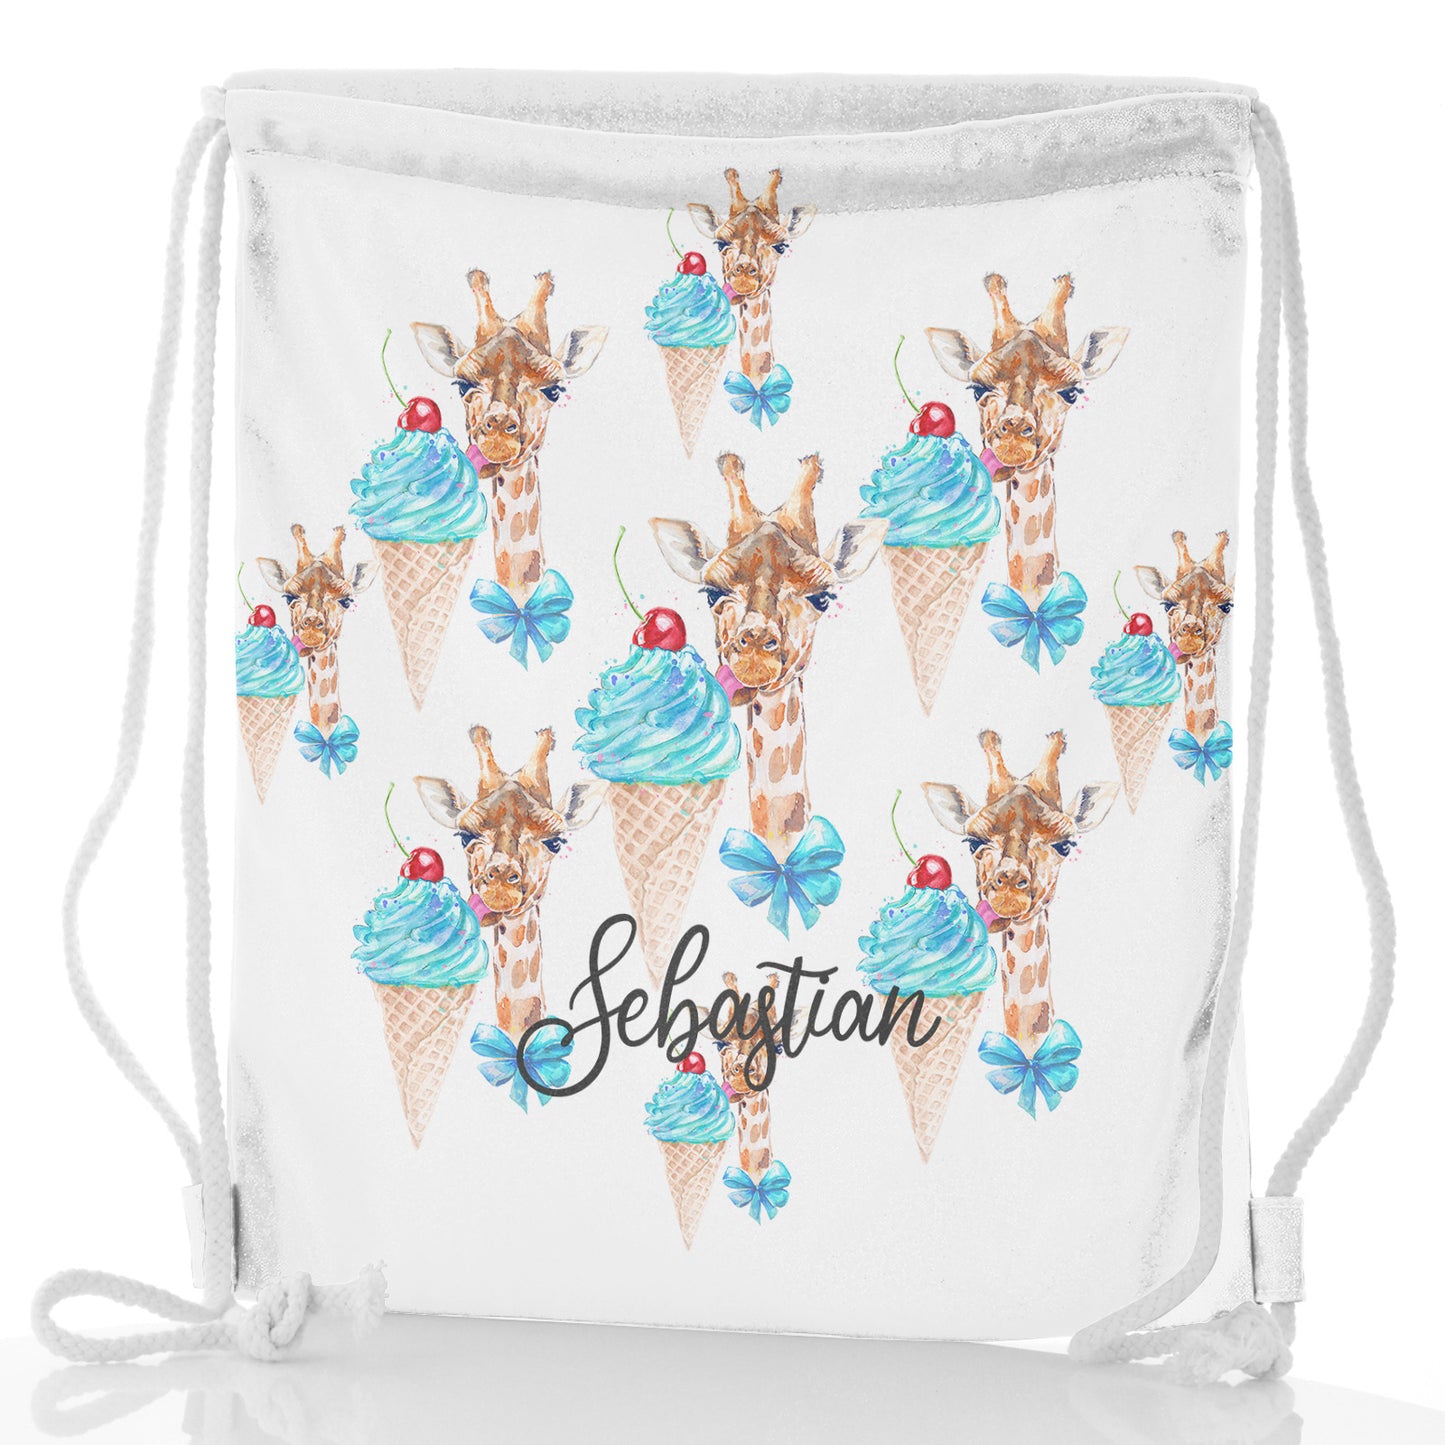 Personalised Glitter Drawstring Backpack with Giraffe Blue Ice creams and Cute Text